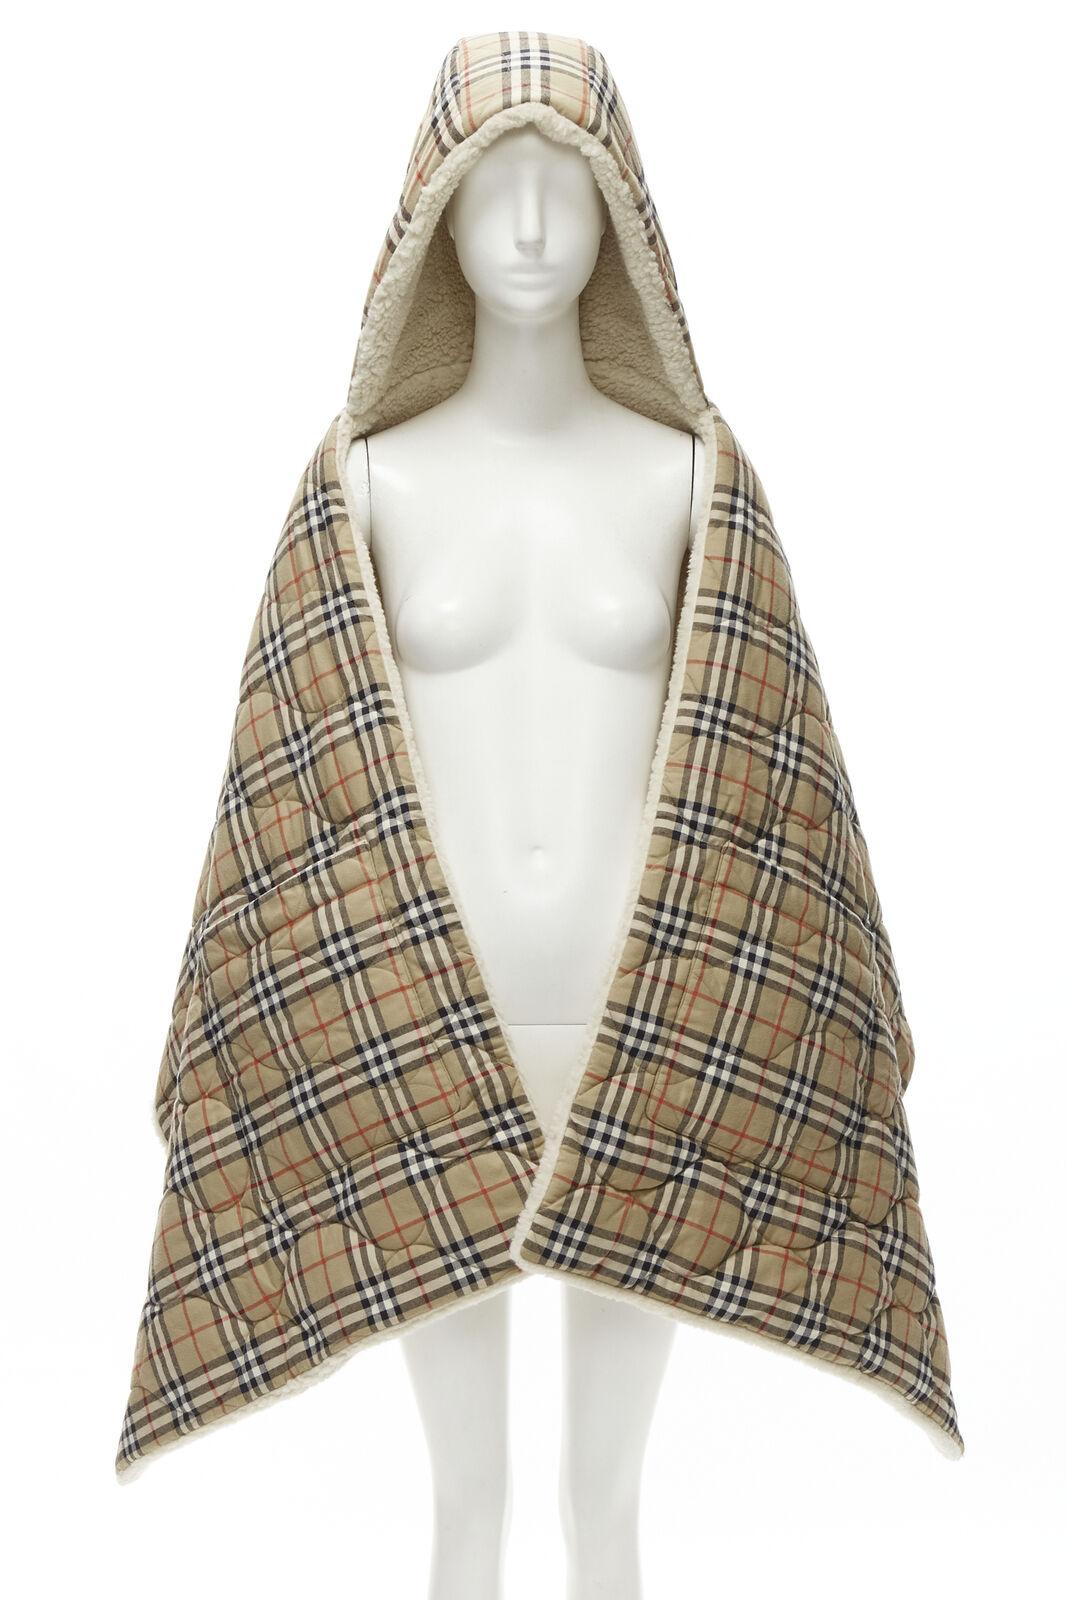 new BURBERRY RICCARDO TISCI Check flannel fleece hooded padded stole shawl 4